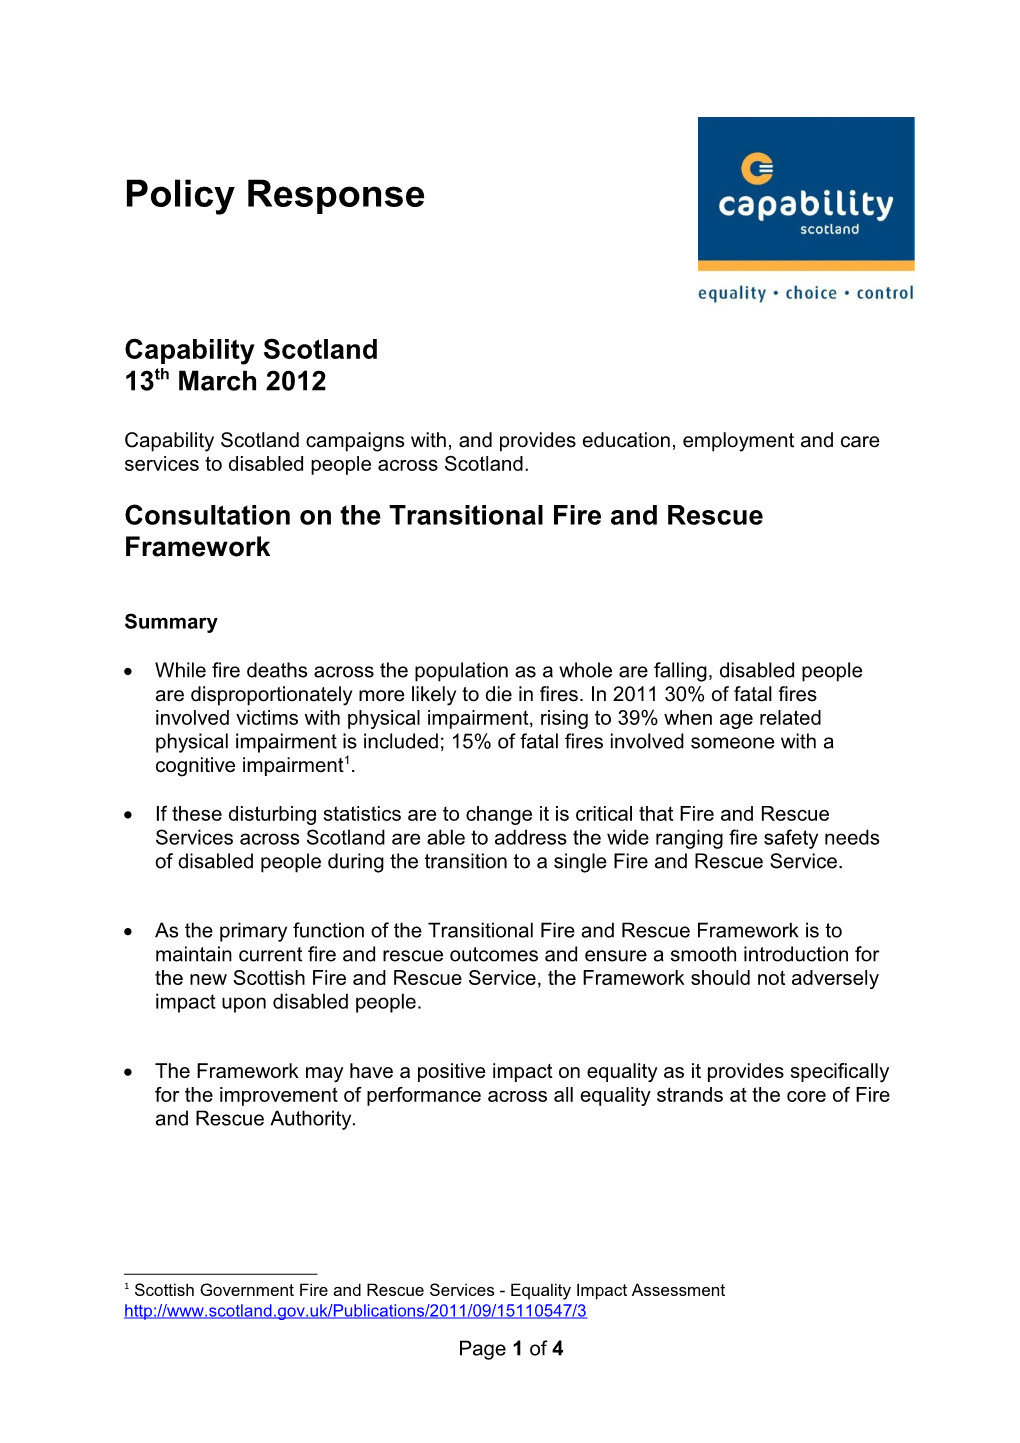 Consultation on the Transitional Fire and Rescue Framework